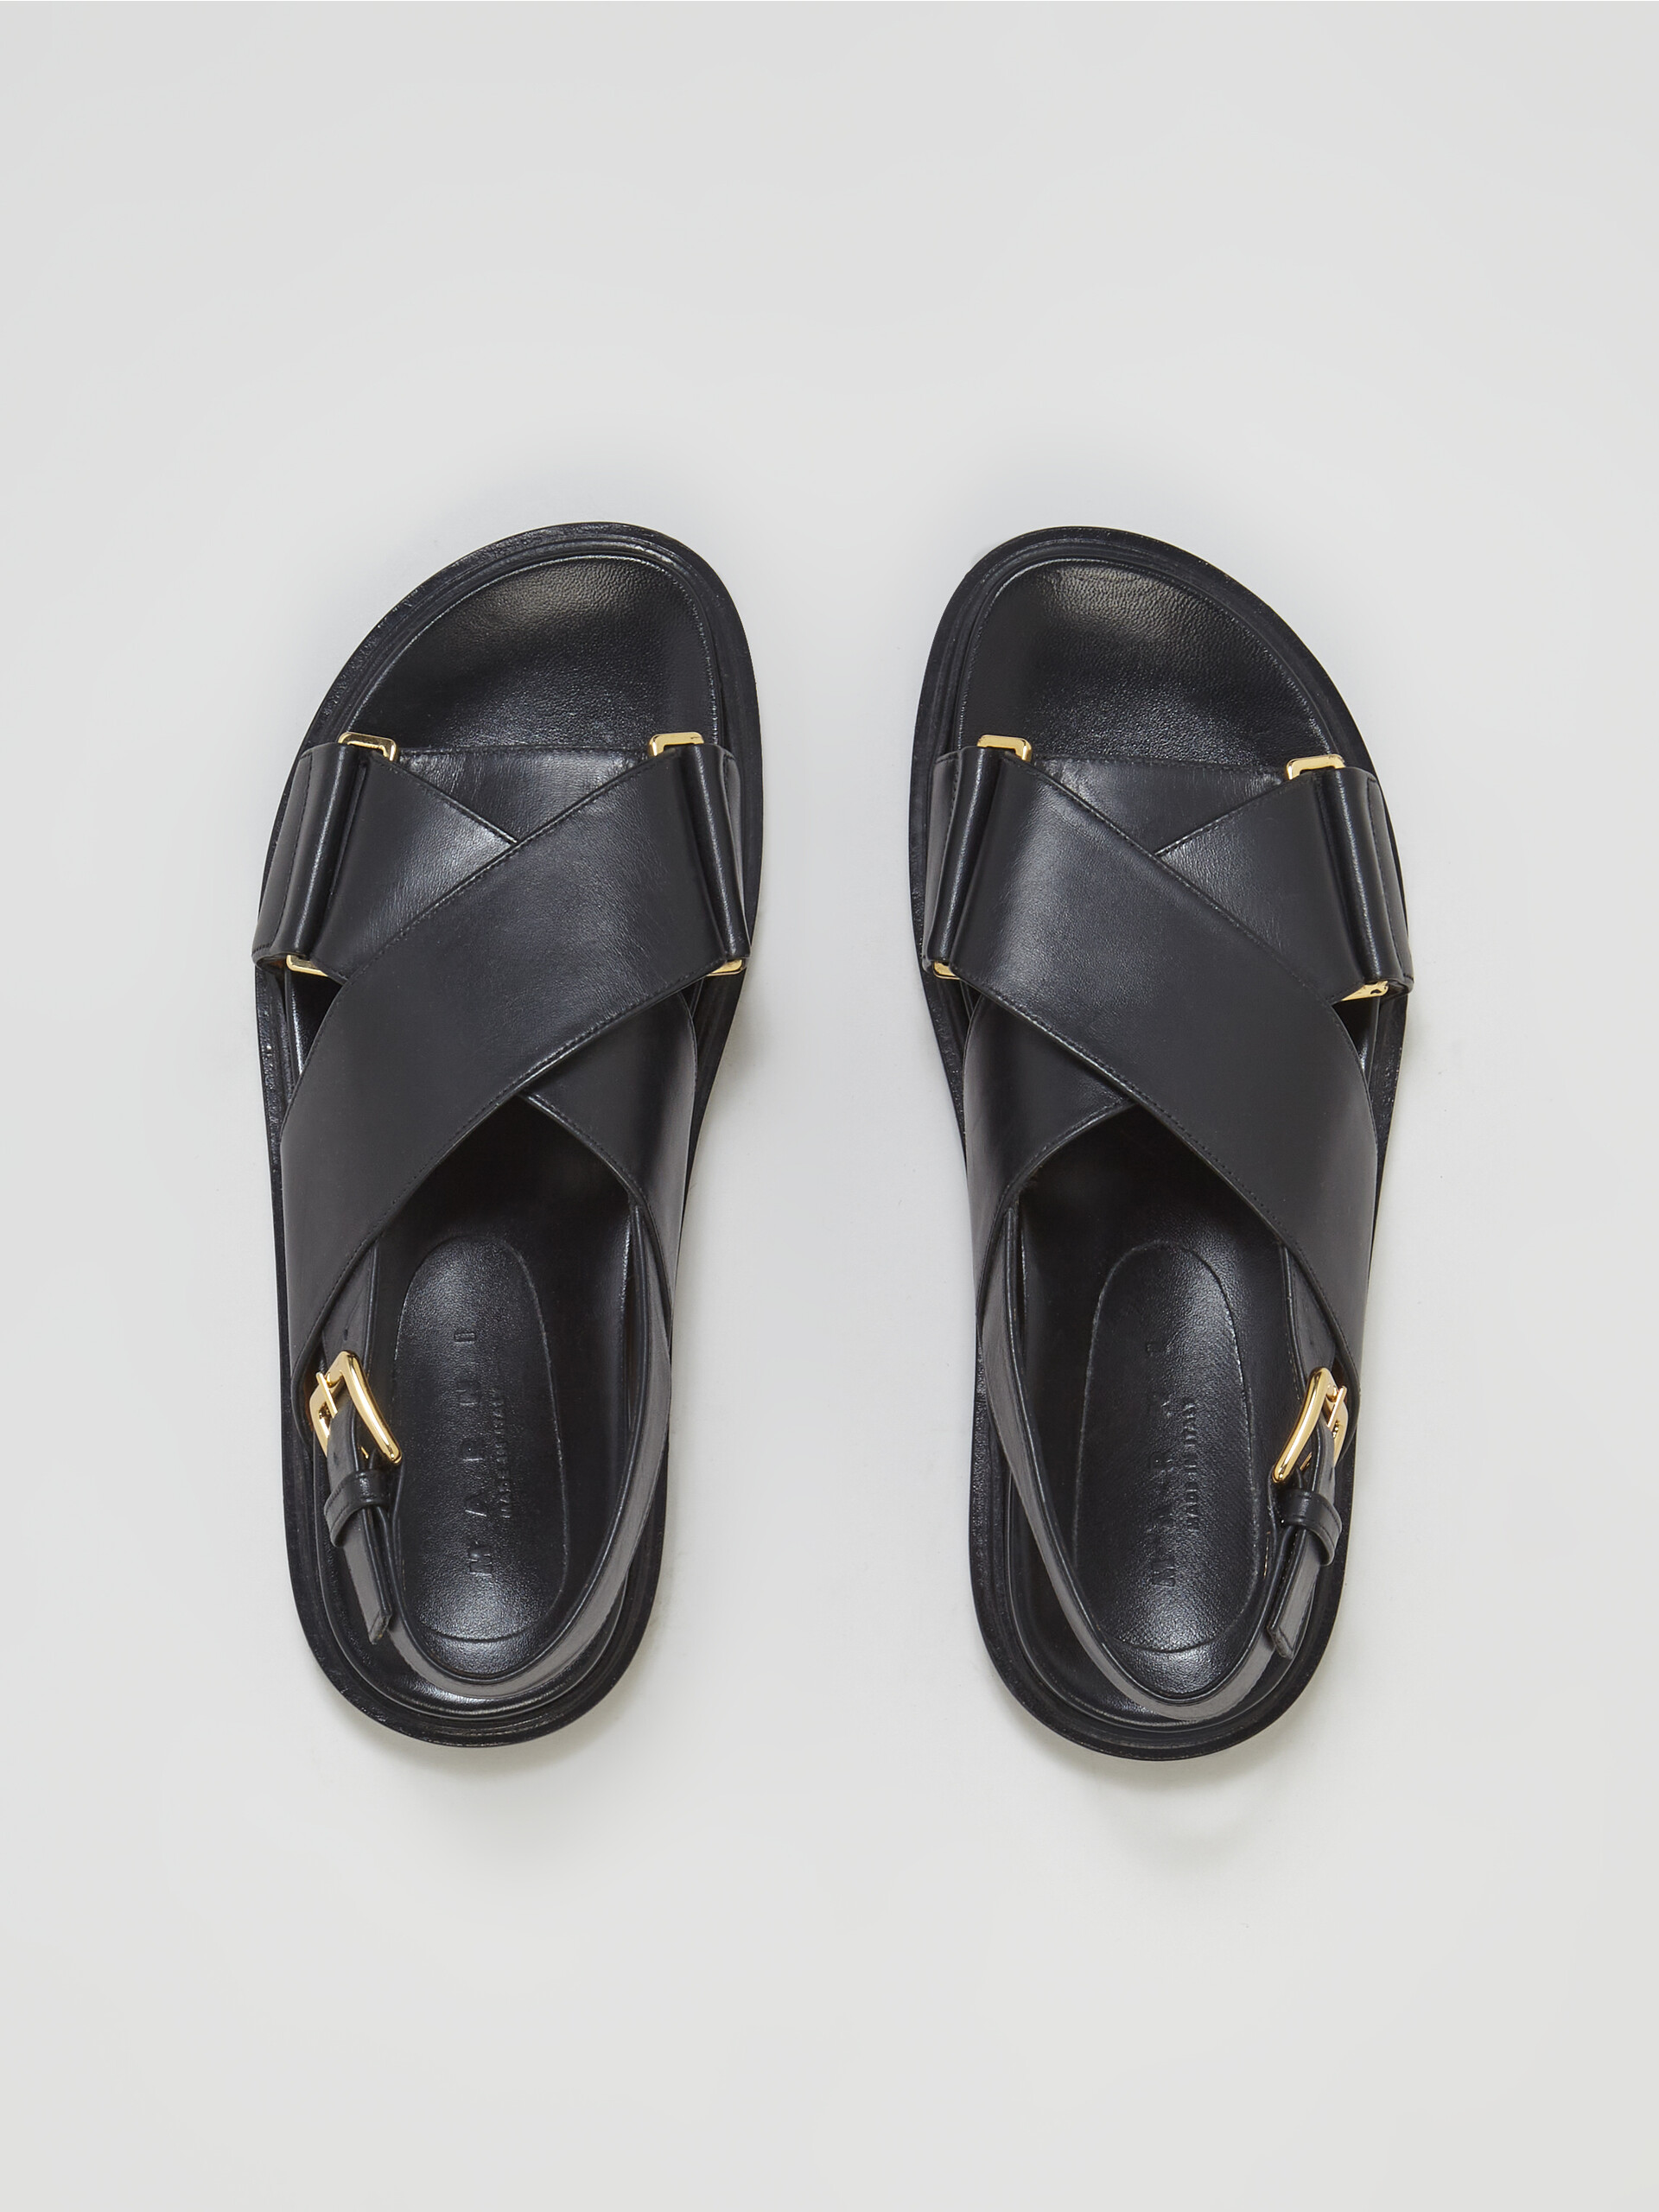 Black smooth calf leather fussbett - Sandals - Image 4